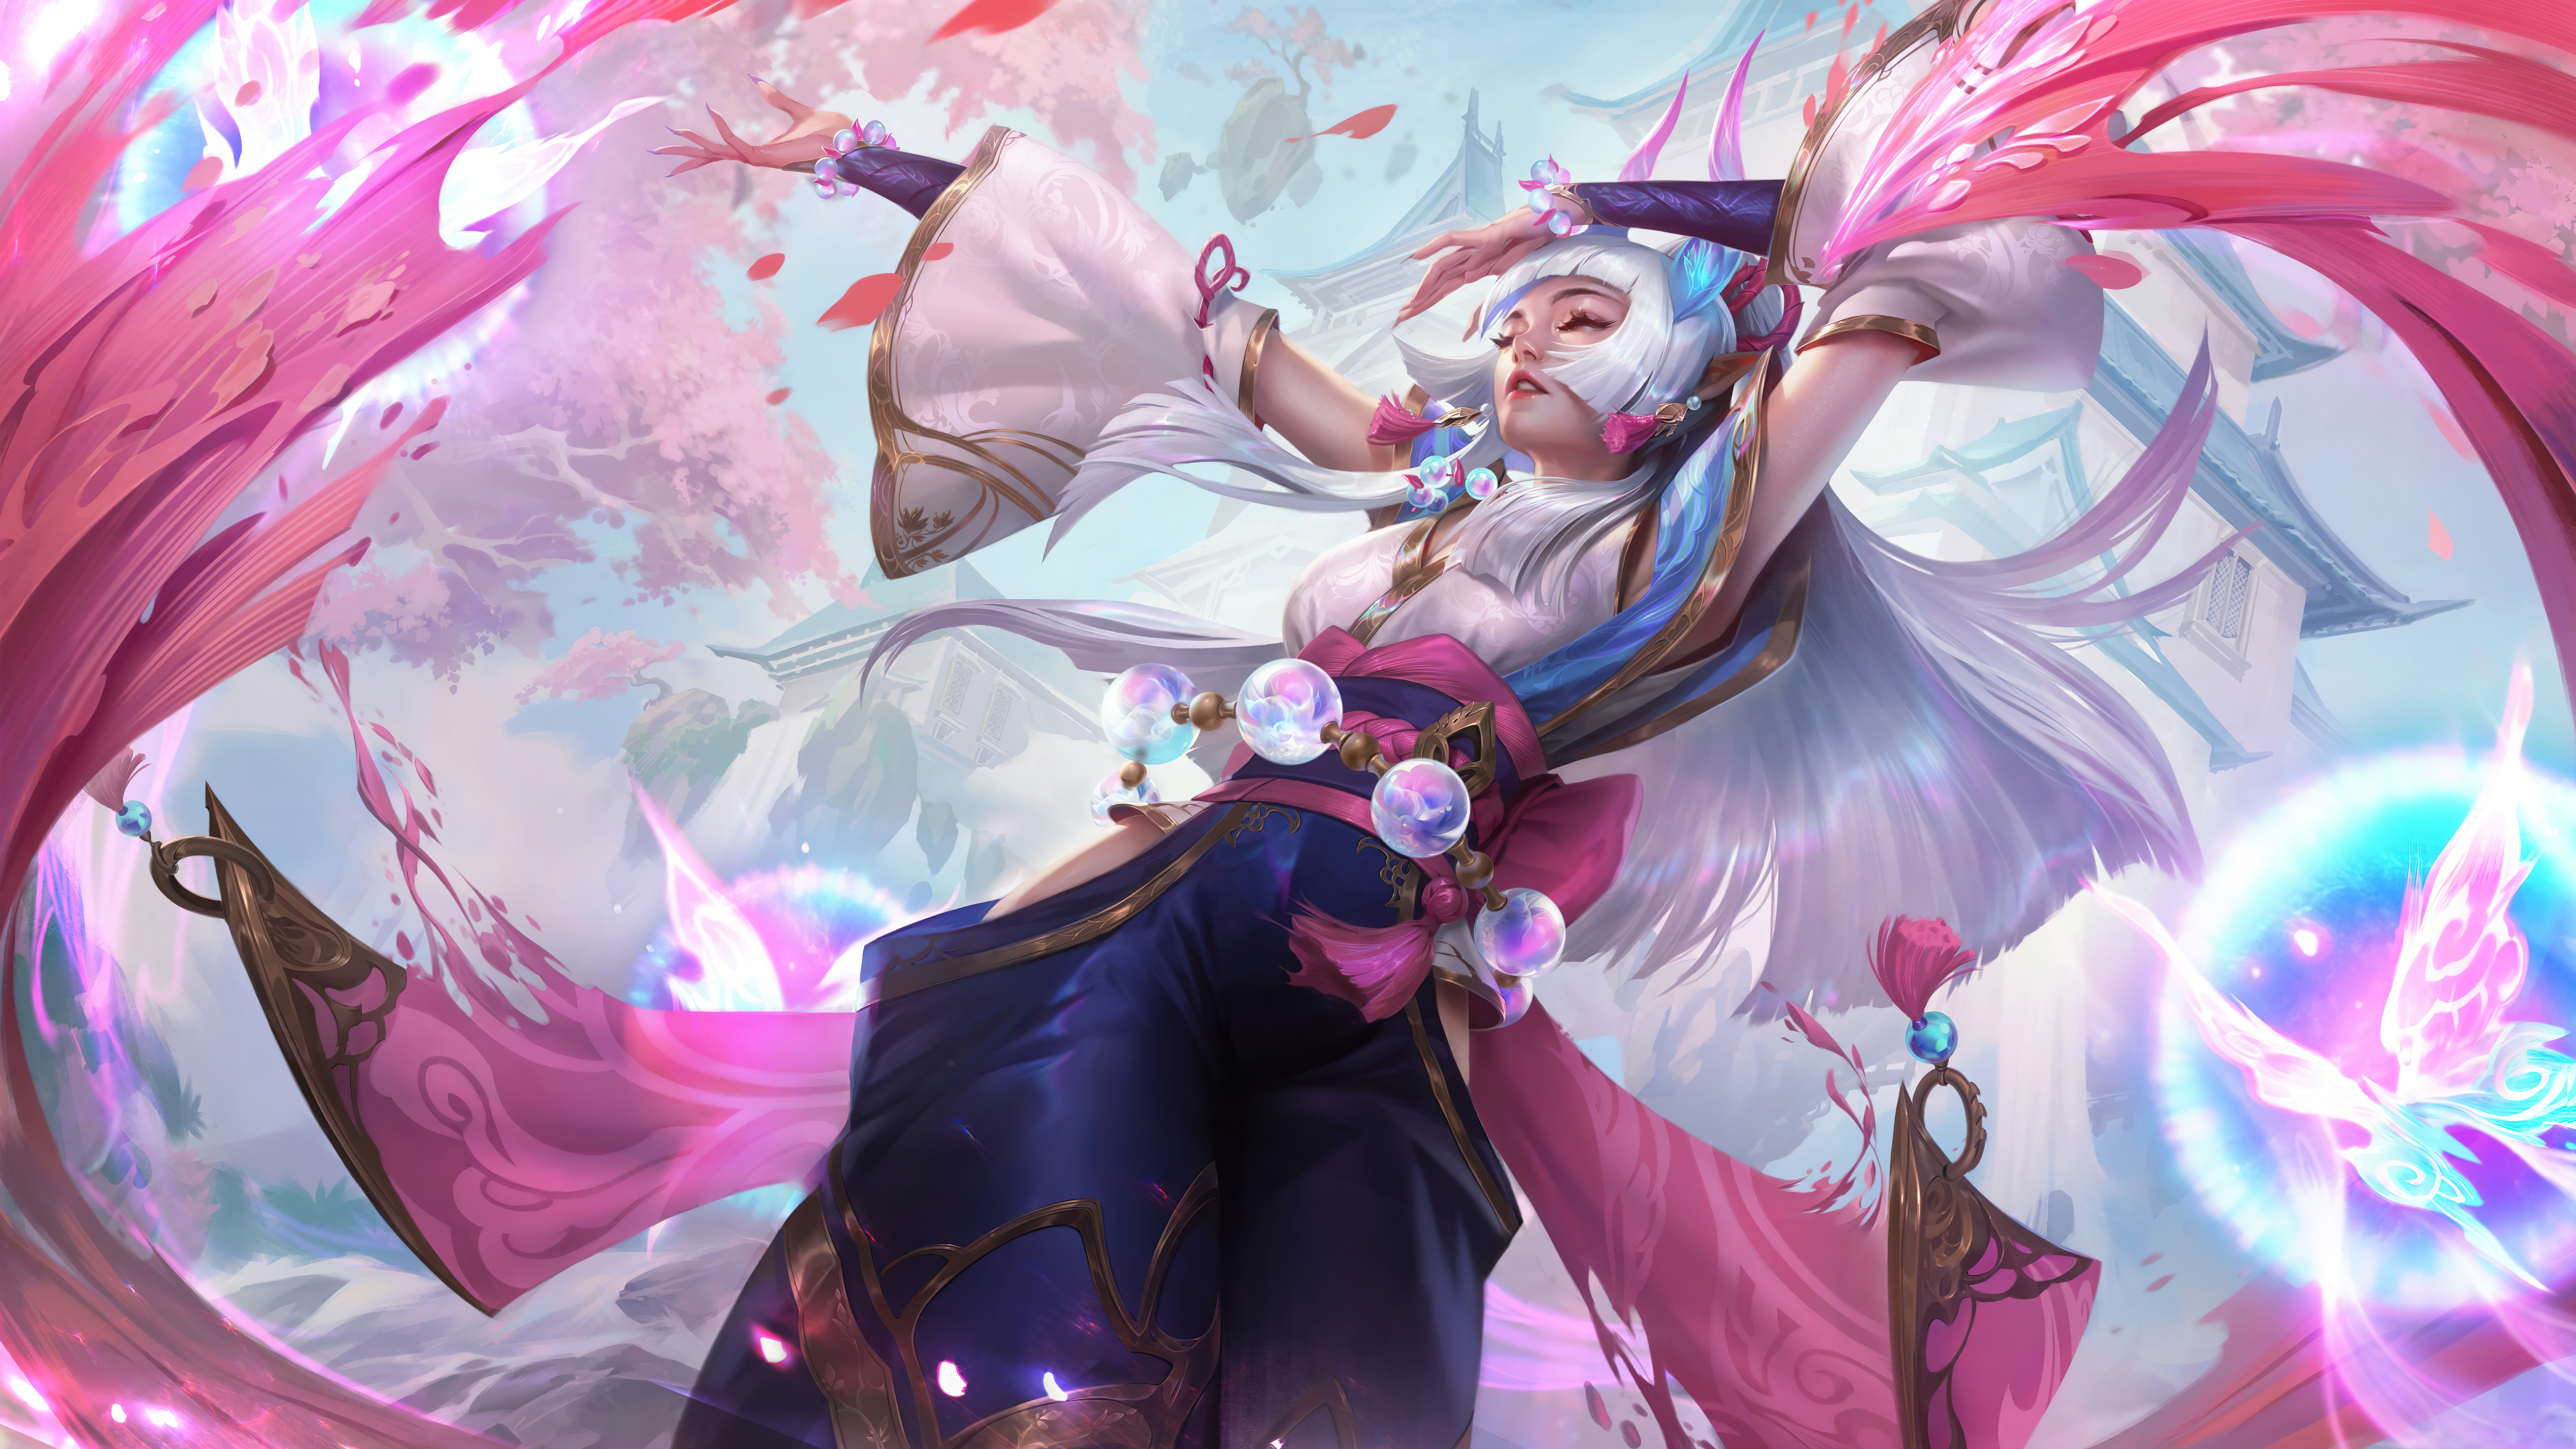 General 7680x4320 Syndra (League of Legends) Syndra spirit blossom Spirit Blossom (League of Legends) League of Legends digital art Riot Games 4K GZG video games video game characters